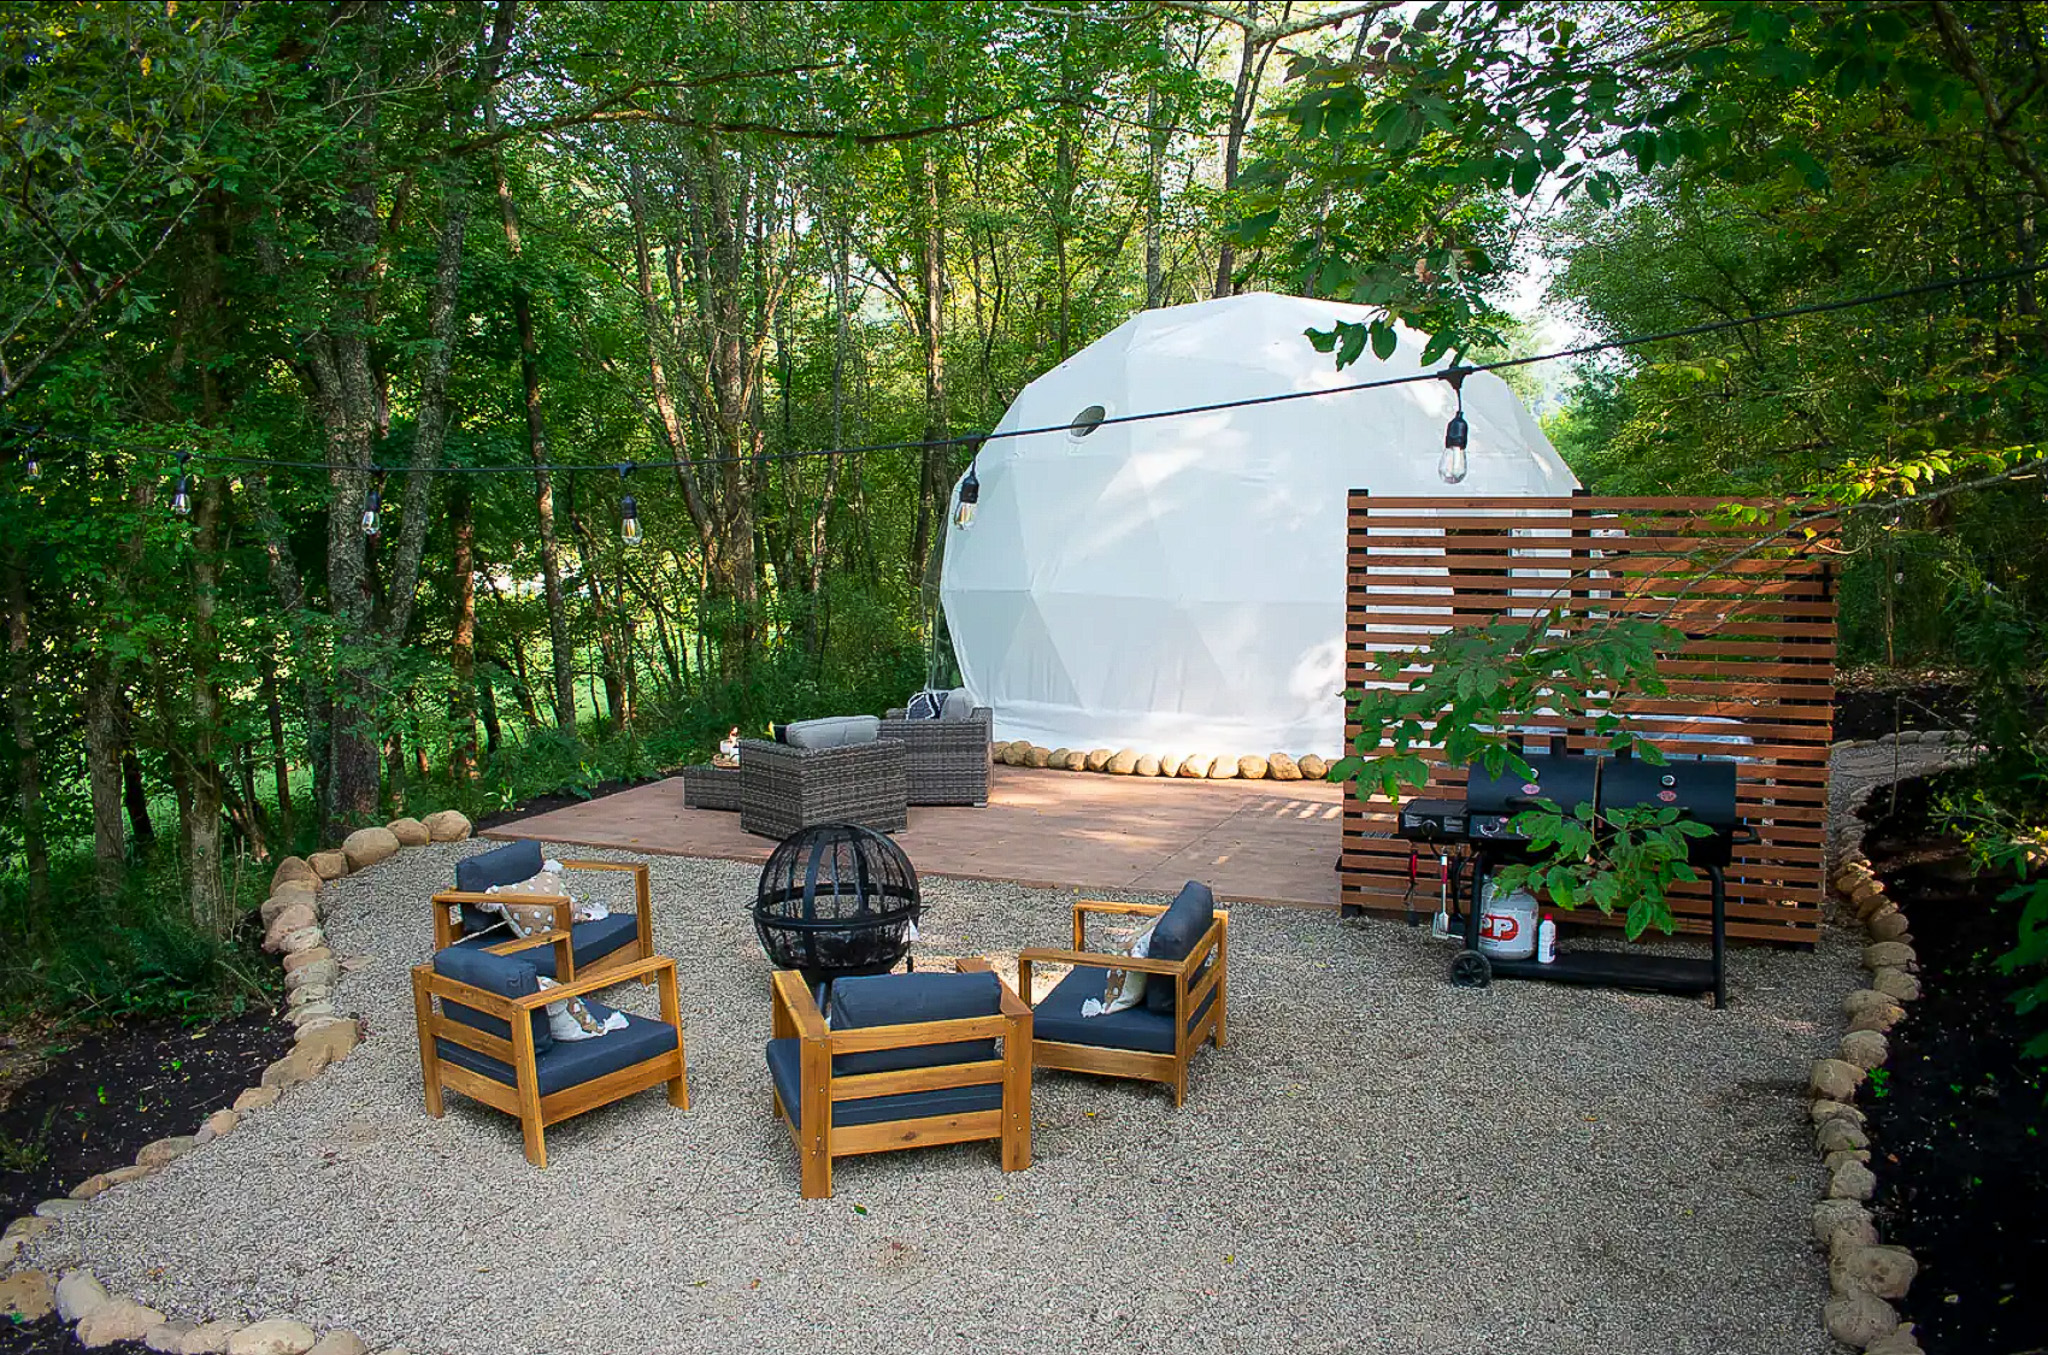 white geodesic dome with some chairs and ta table in a forest